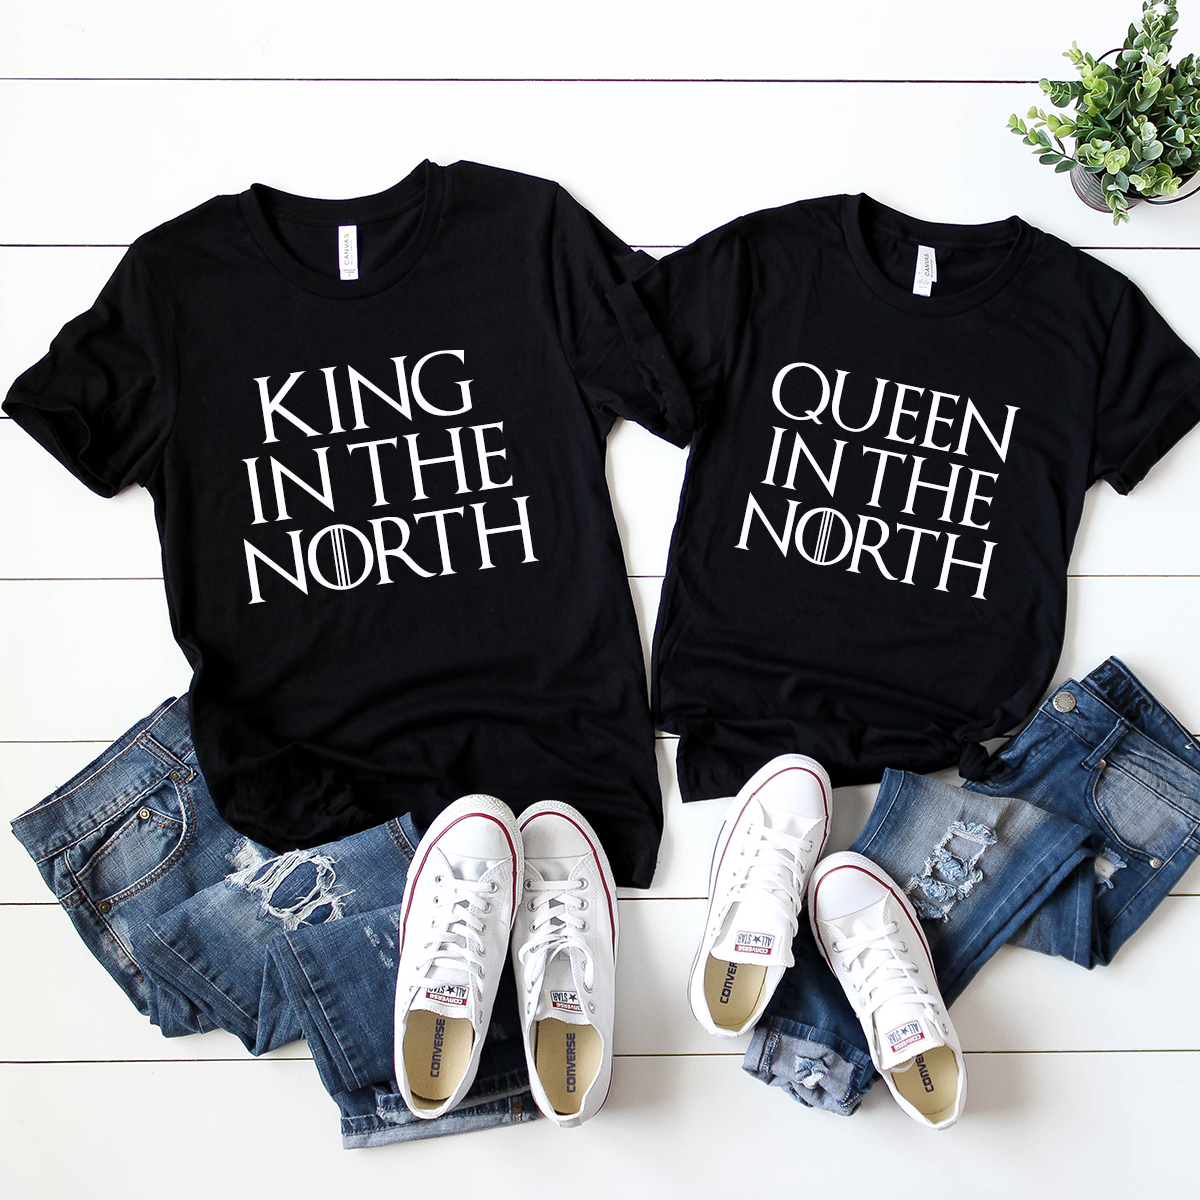 King/Queen in the North black t-shirt